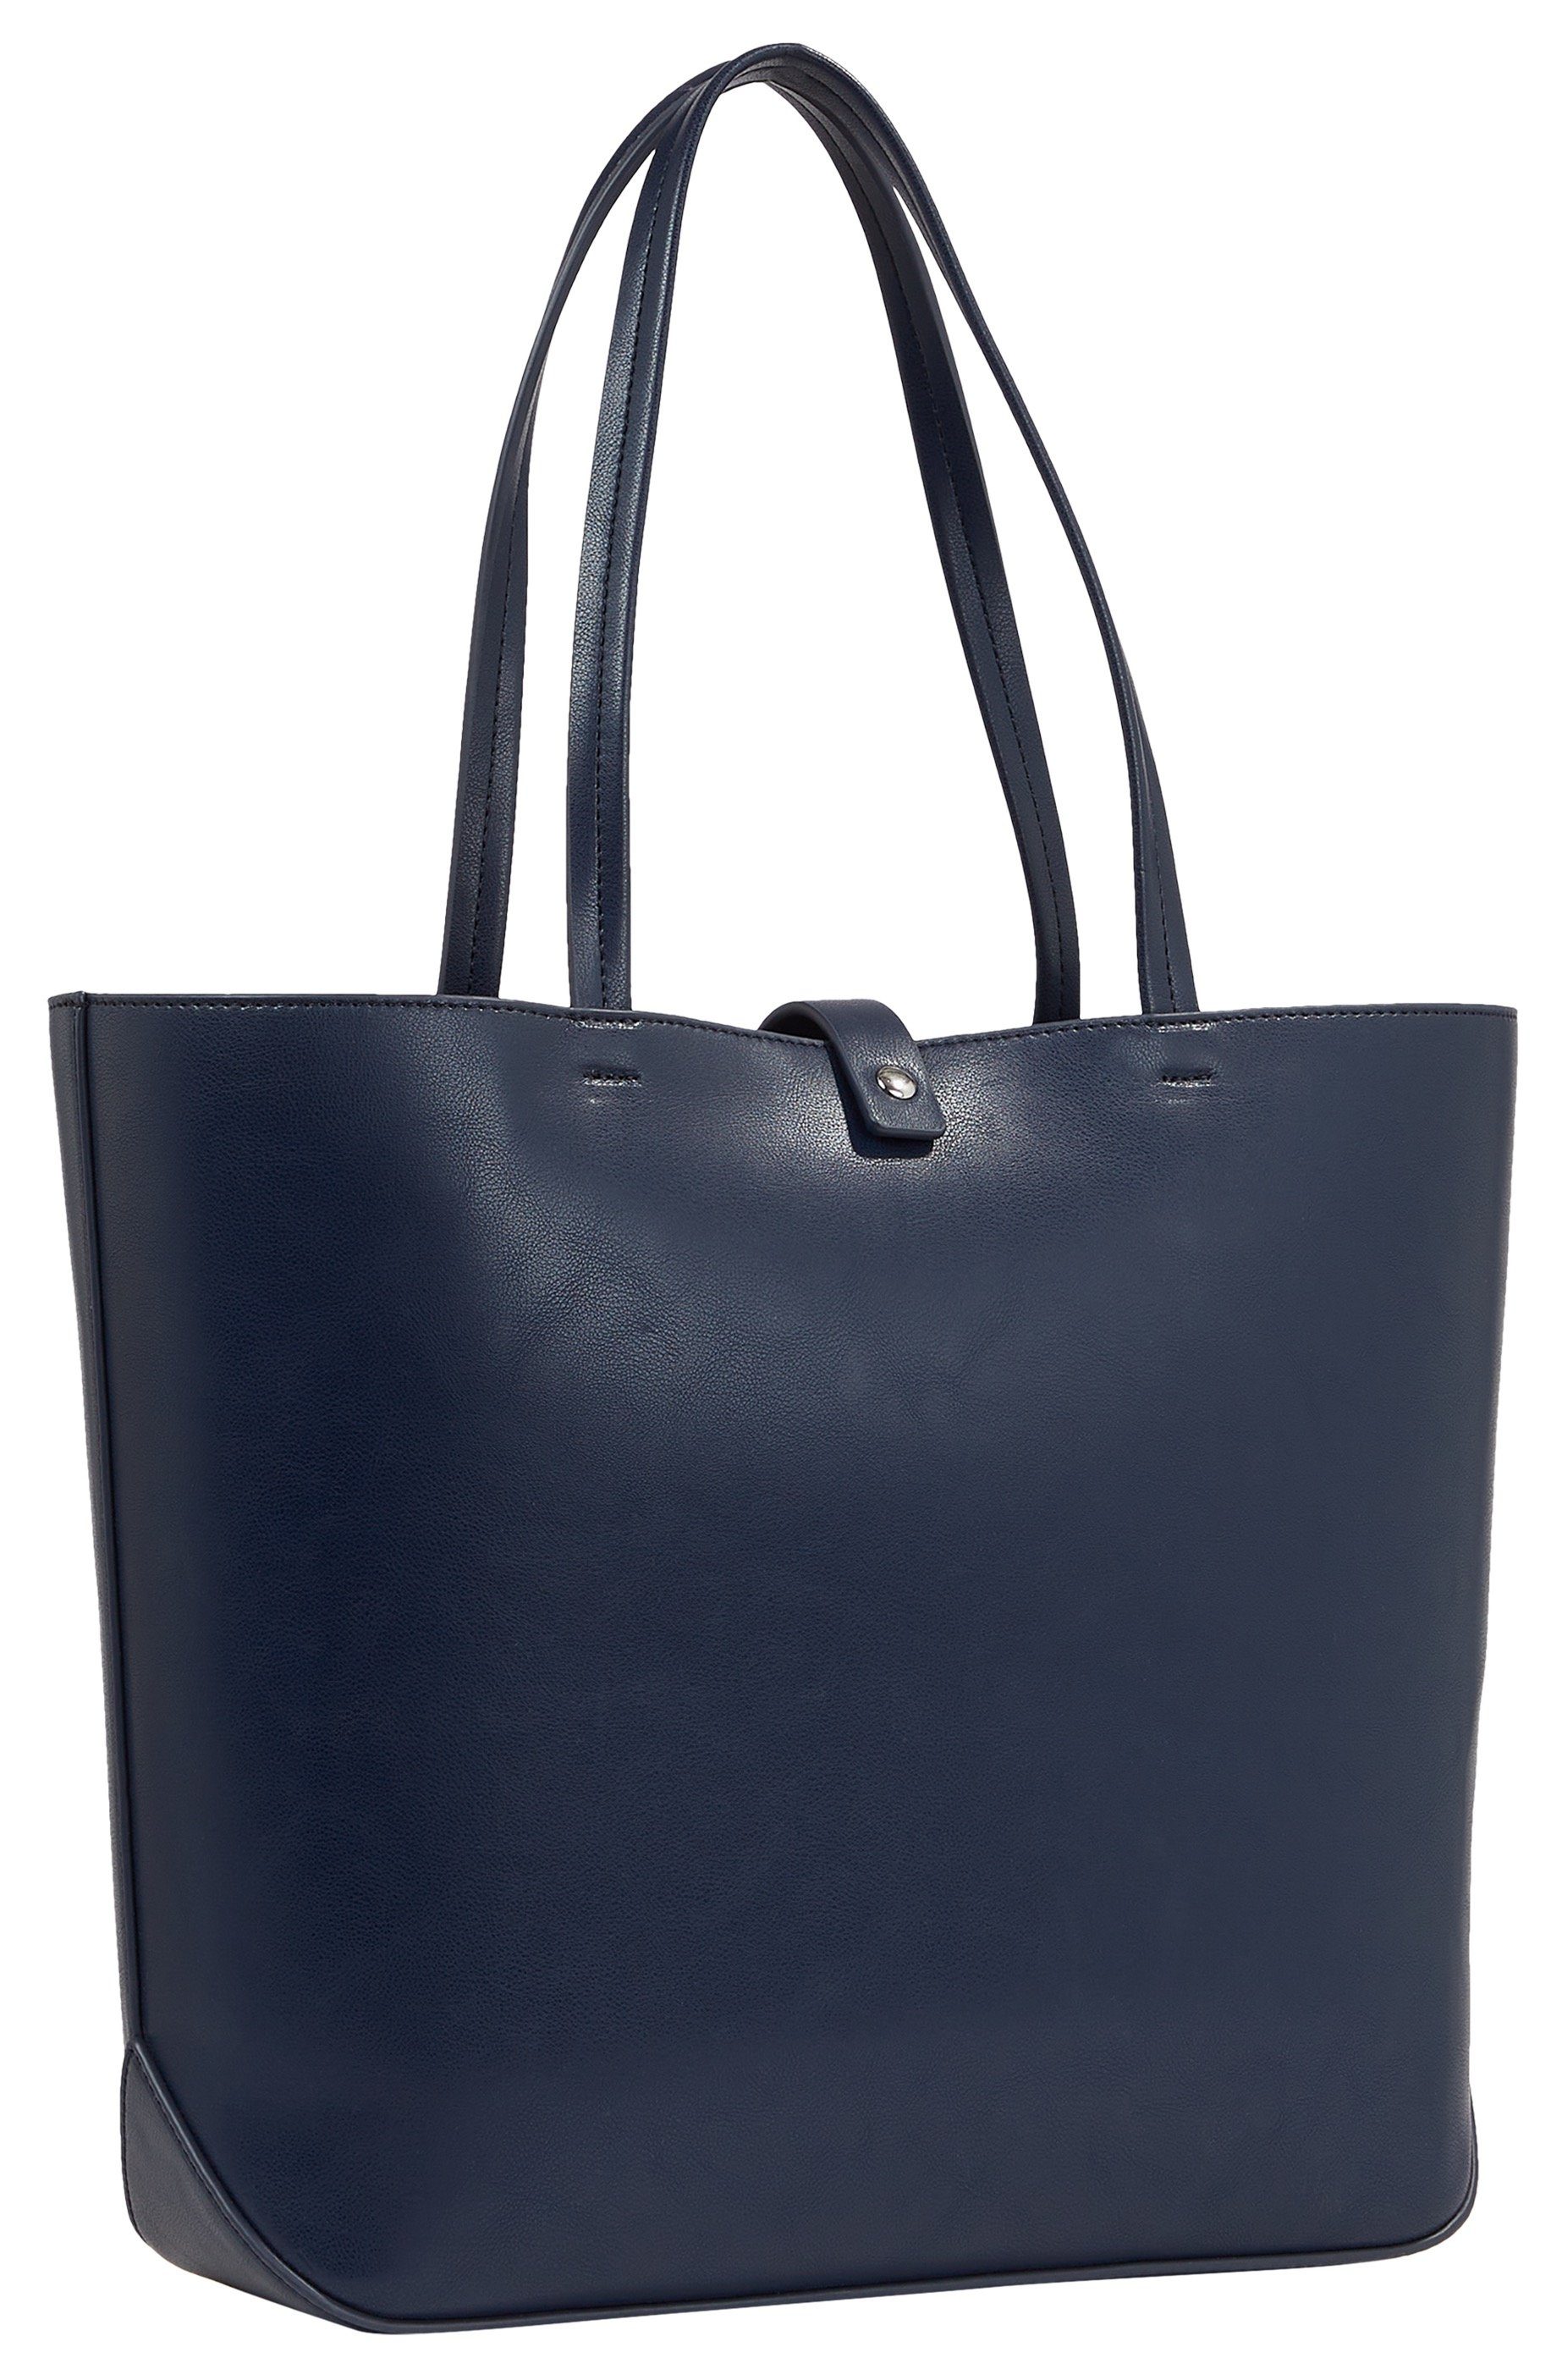 TOMMY JEANS Shopper TJW ESS MUST TOTE in een modieus design